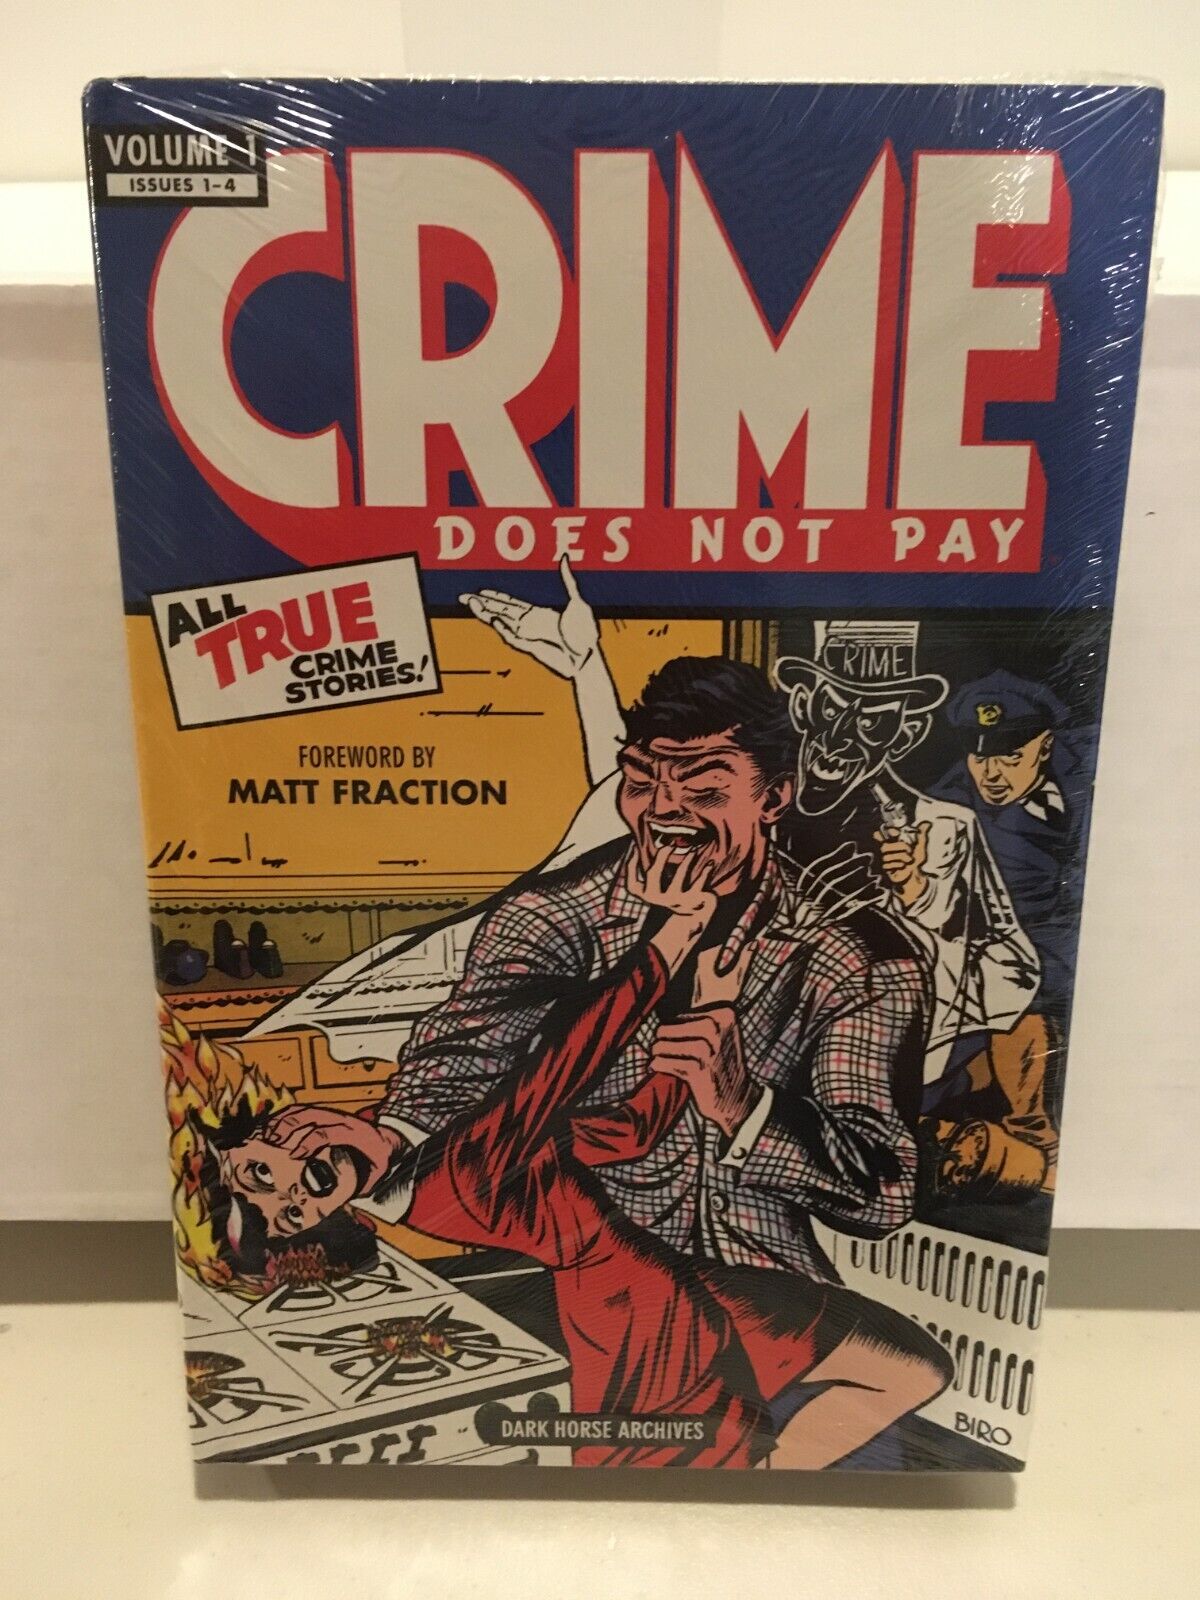 Dark Horse Archives: Crime Does Not Pay Volume 1 Hardcover Brand New Unopened